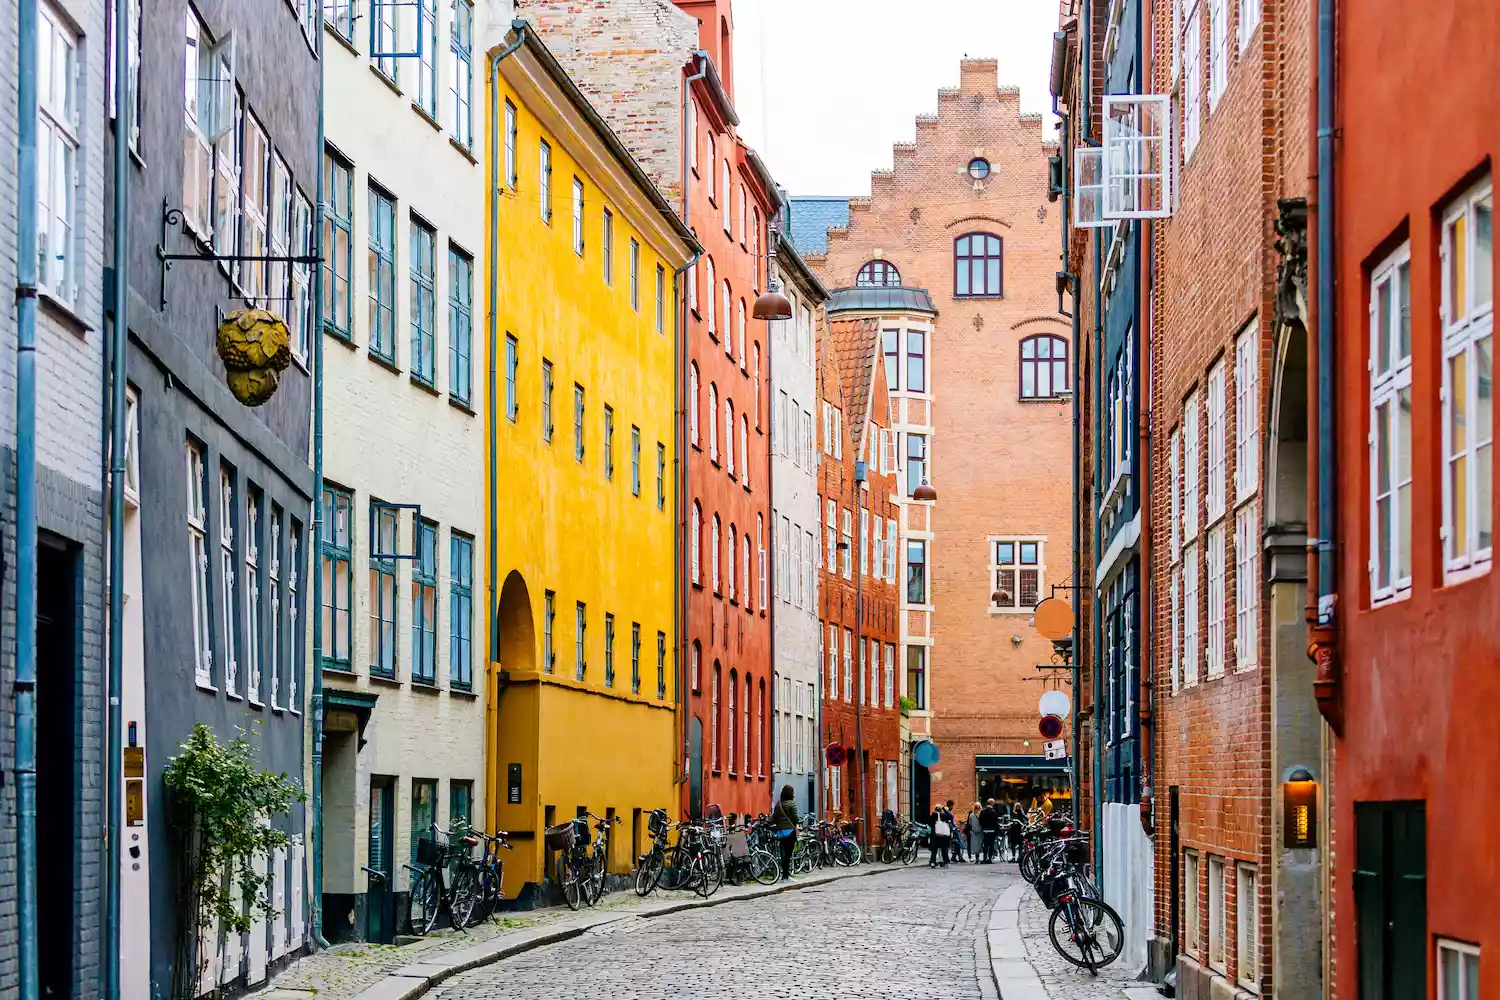 Colorful buildings on a cobbled road lined with bicycles